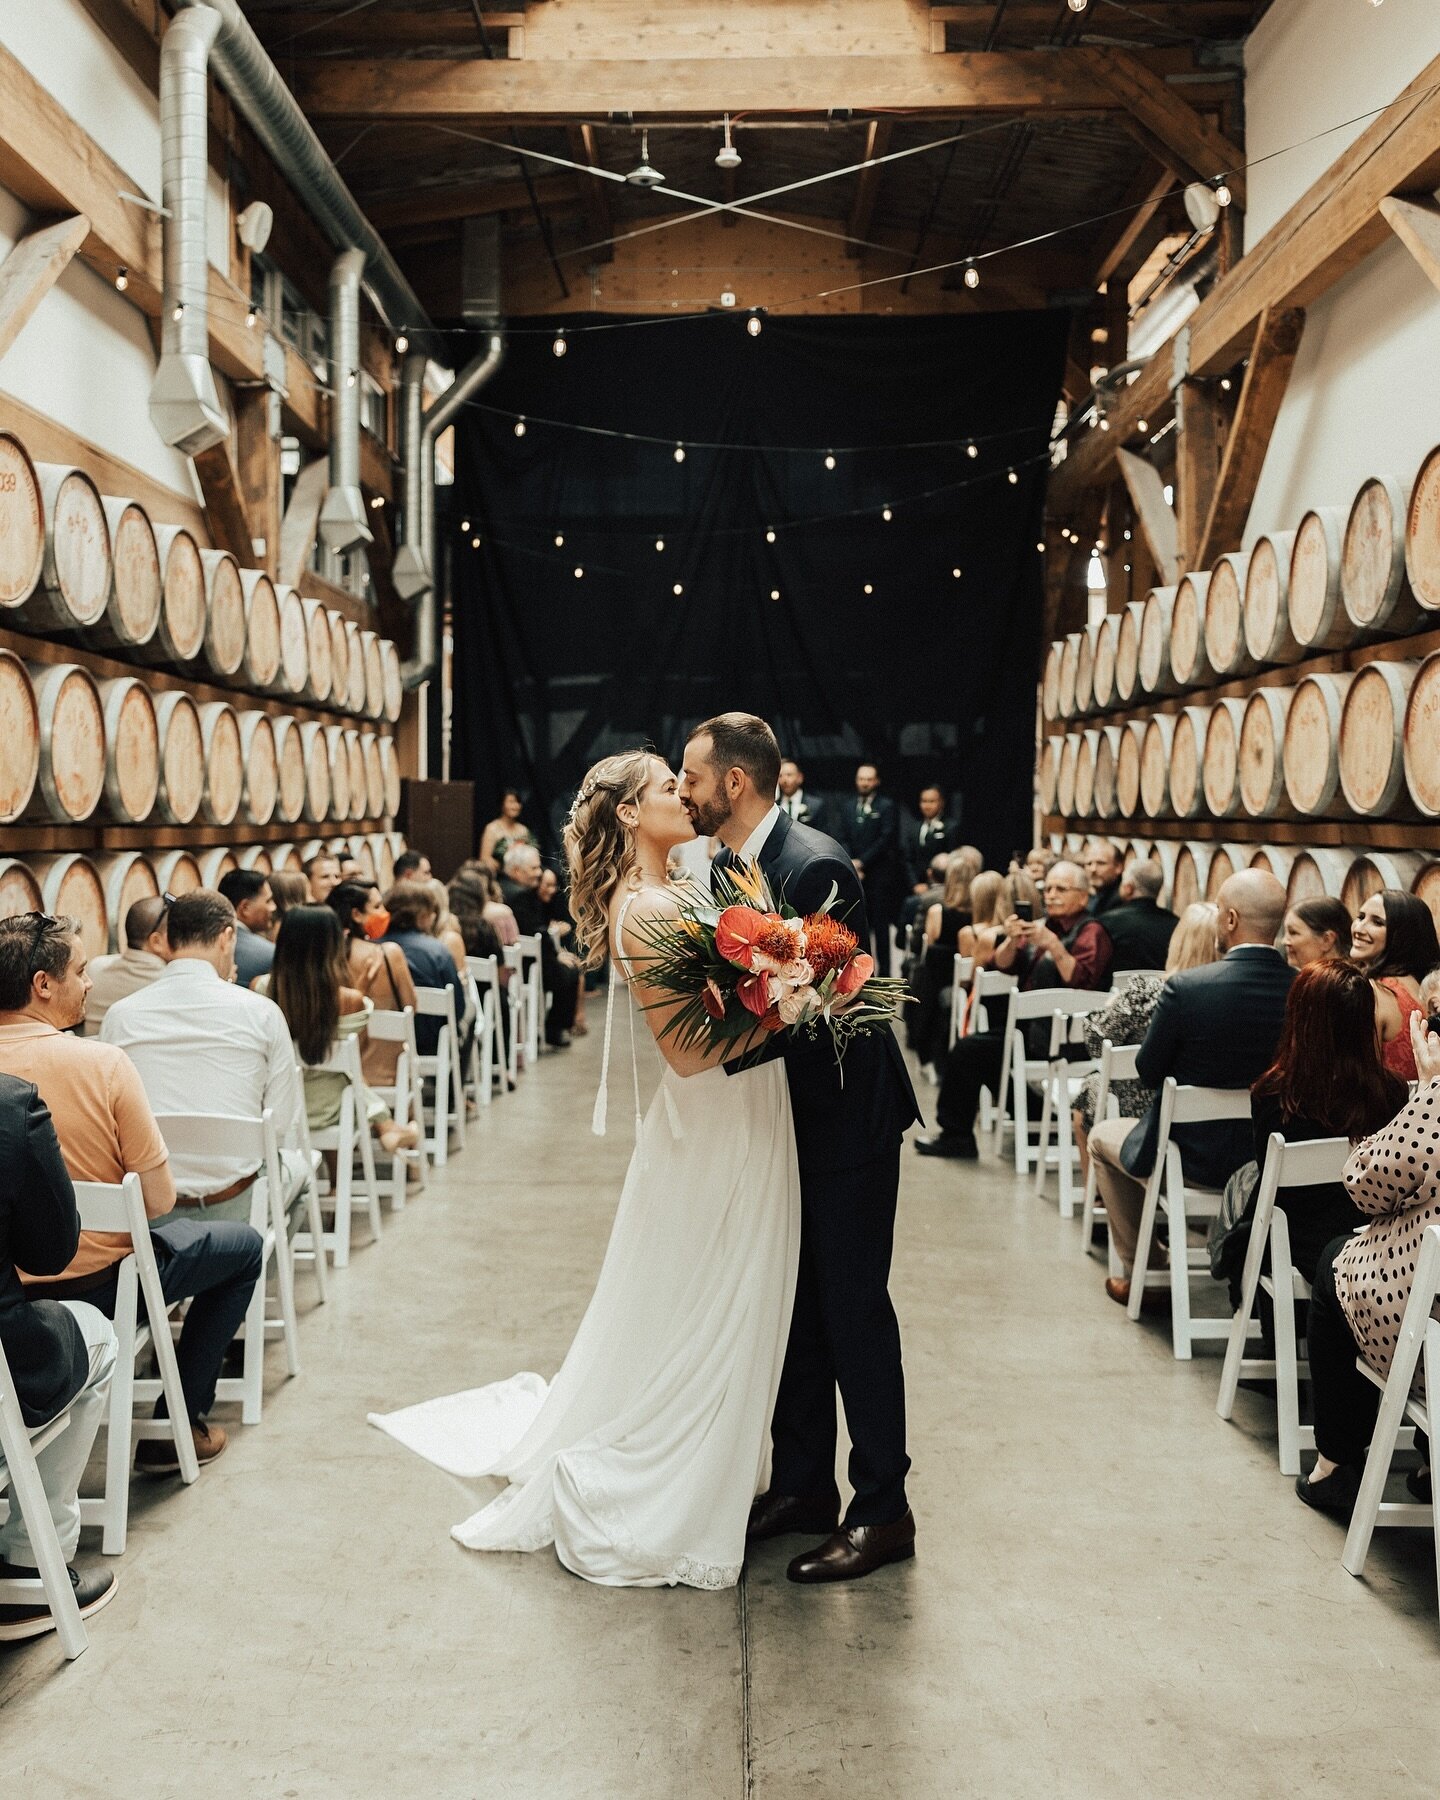 A little love for city weddings today because photographing a wedding at a Westland Distillery was pretty fun 🥰

#westlanddistillery #seattleweddingphotographer #seattlesummerwedding #seattleindustrialwedding #industrialseattle #seattlewedding #wedd